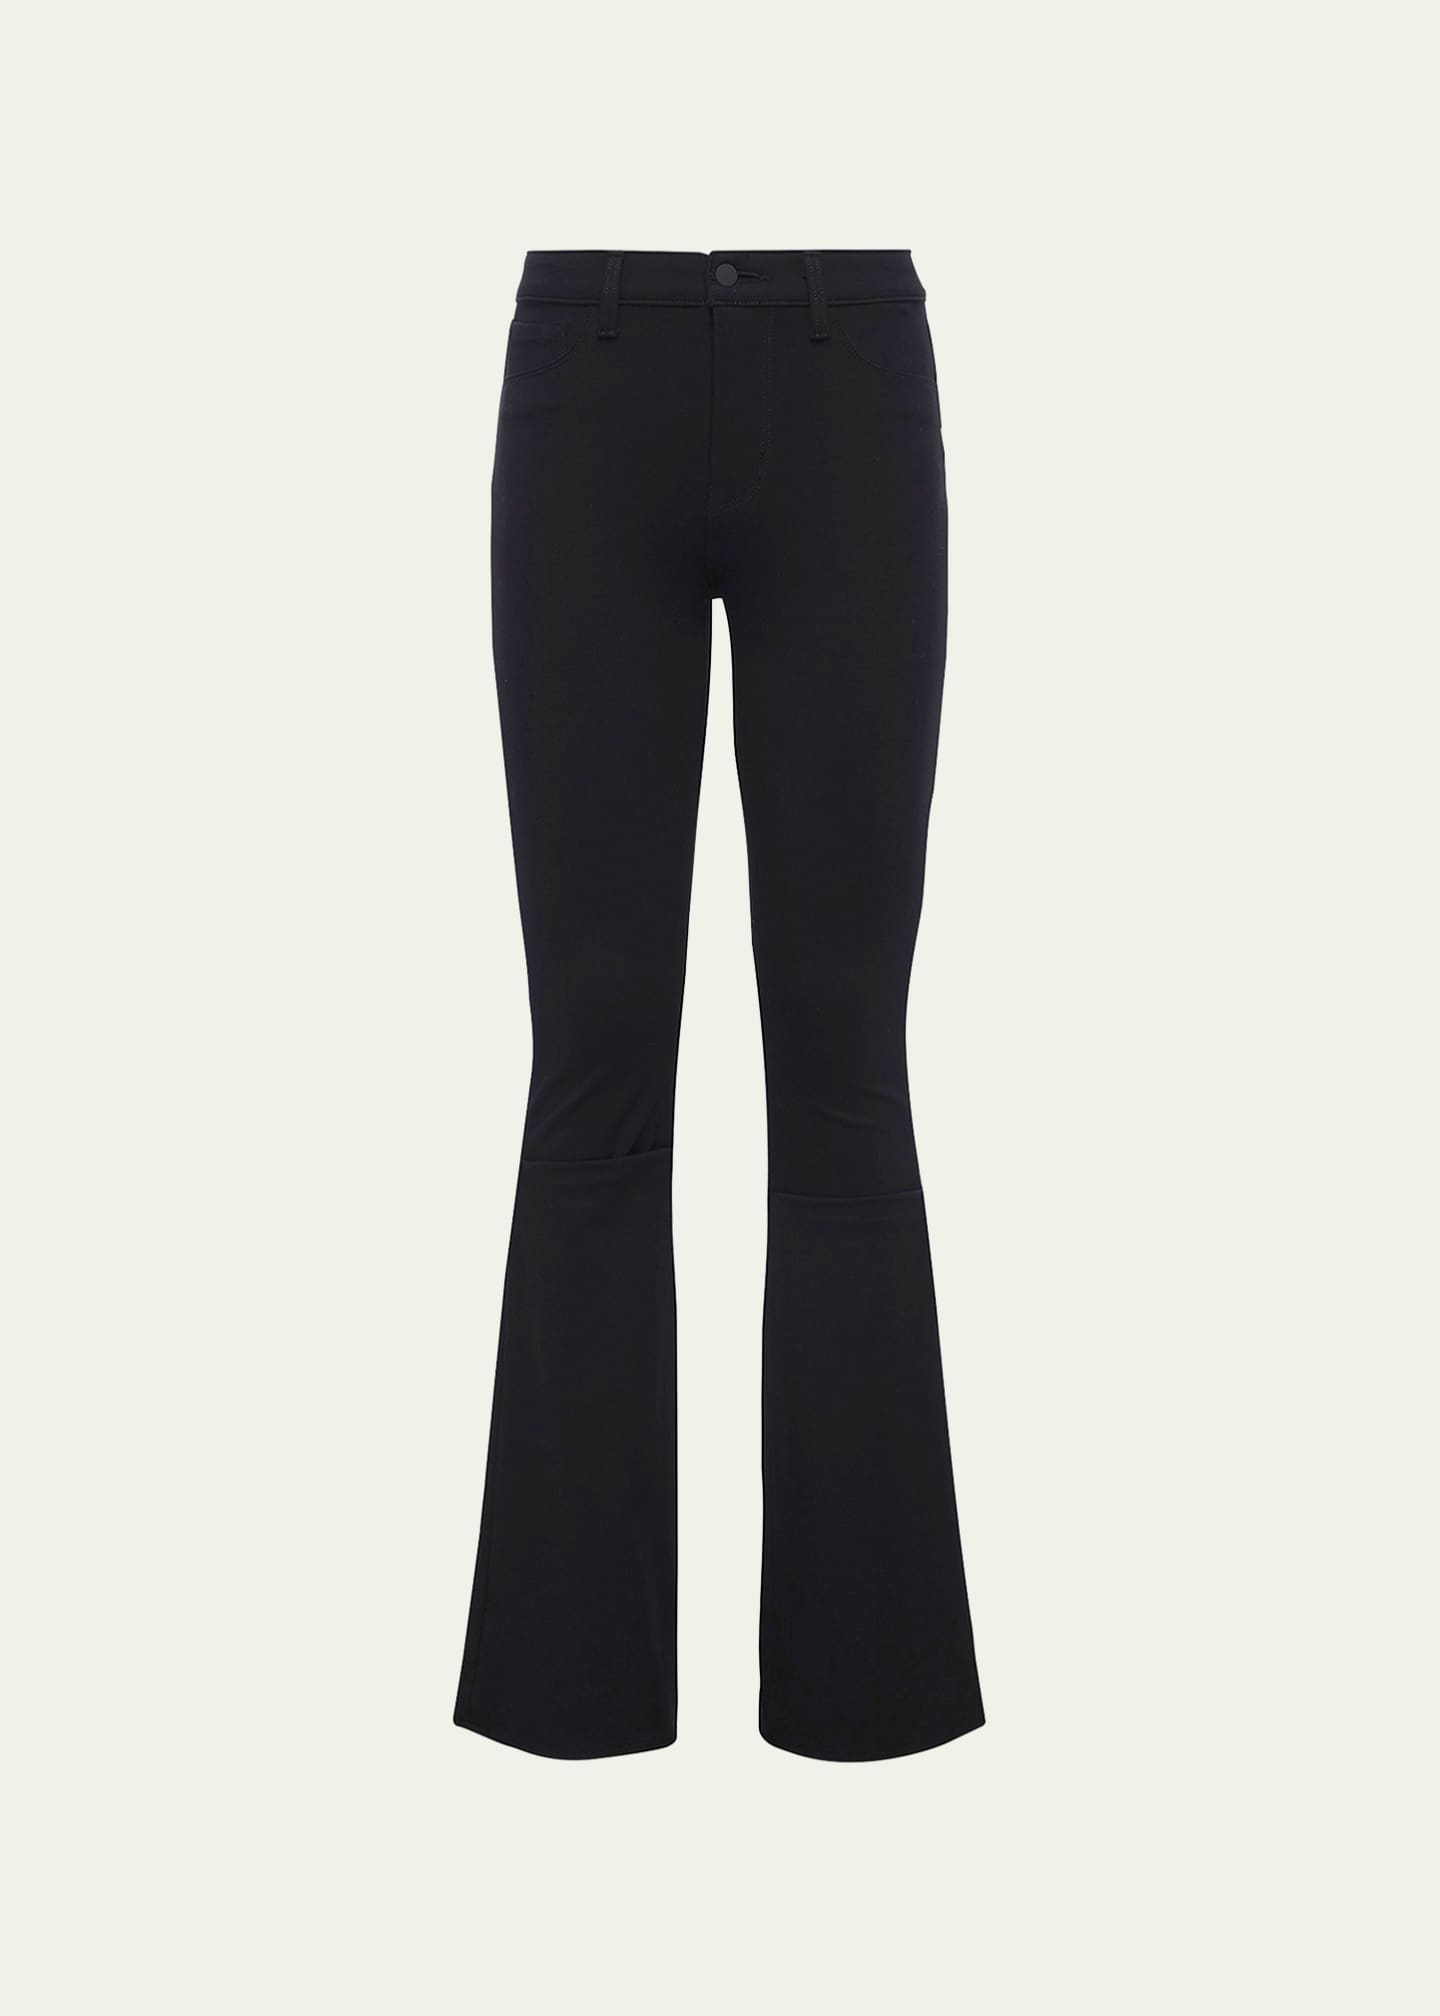 L'Agence Marty High Rise Flare Jeans - Bergdorf Goodman